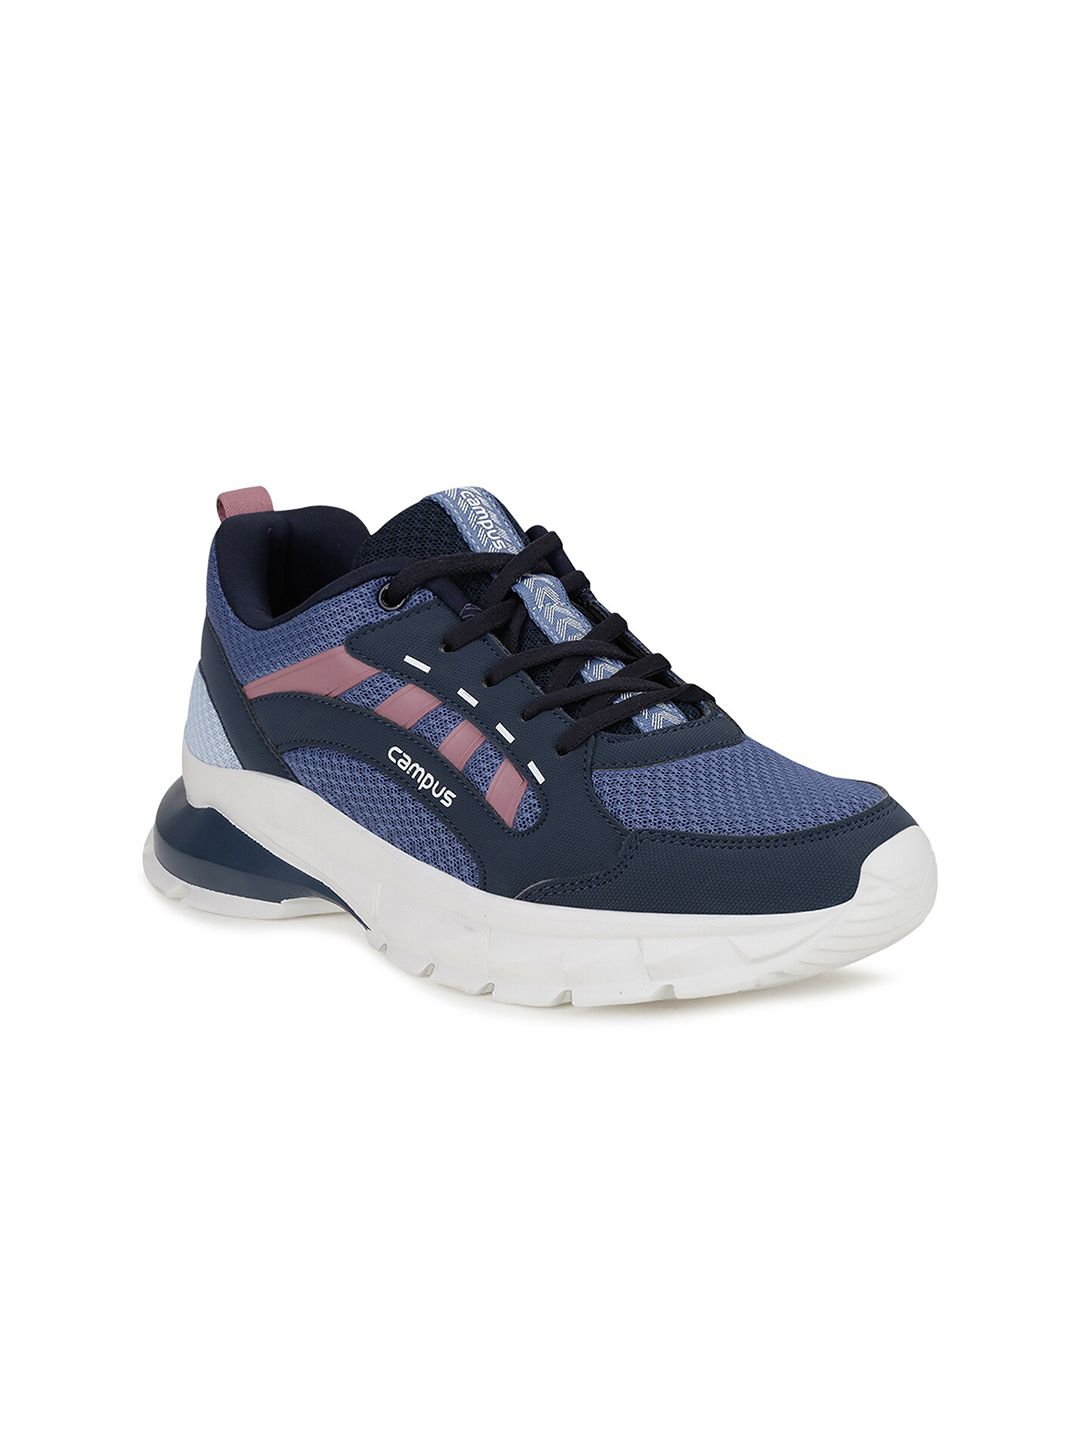 Campus Women Navy Blue Mesh High-Top Running Shoes Price in India